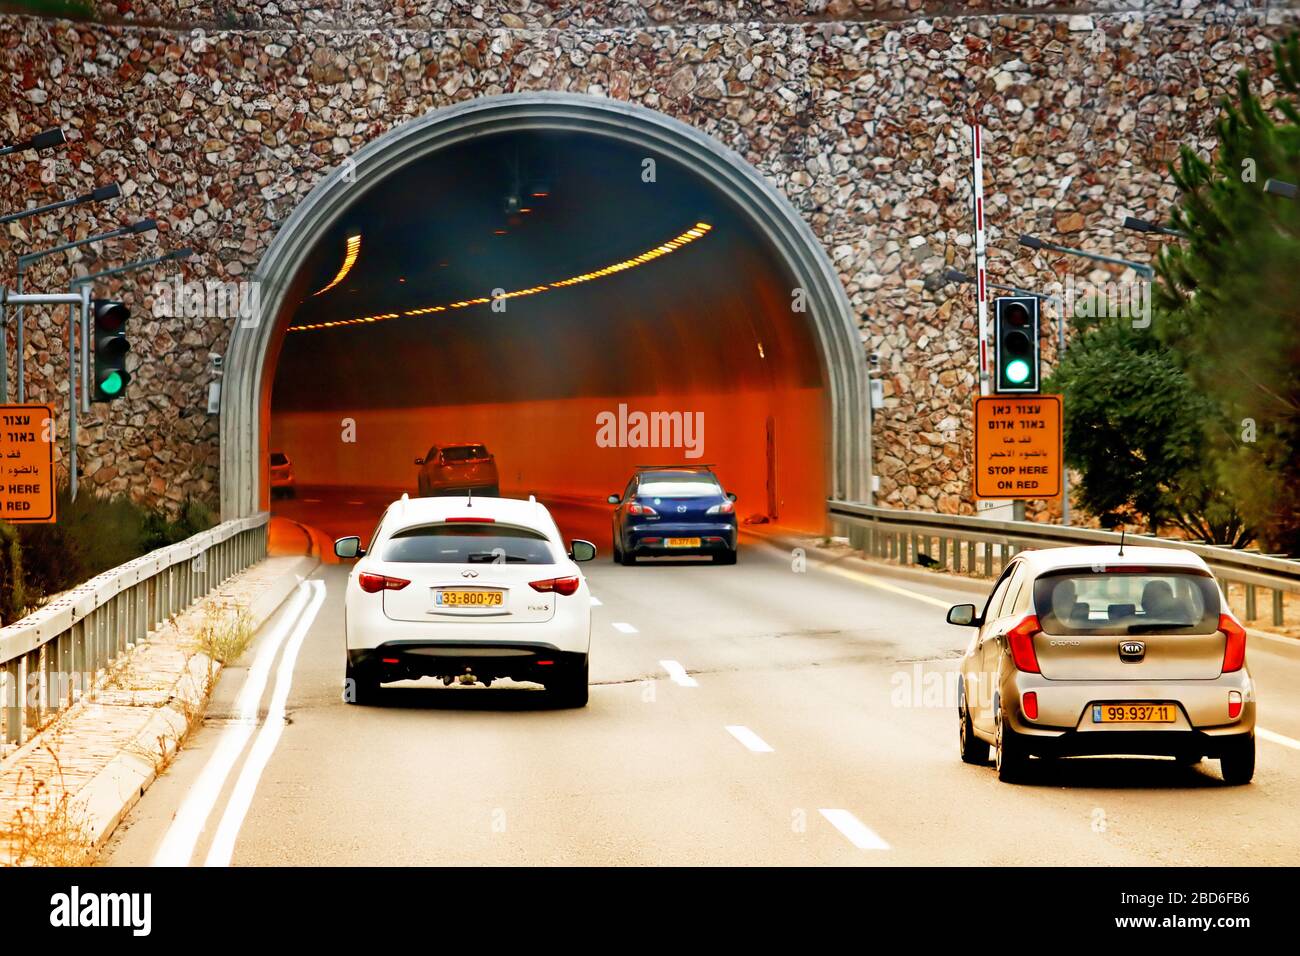 ISRAEL - SEPTEMBER 20, 2017: Cars enter mount highway tunnel on the way to Jerusalem road number 1 Stock Photo